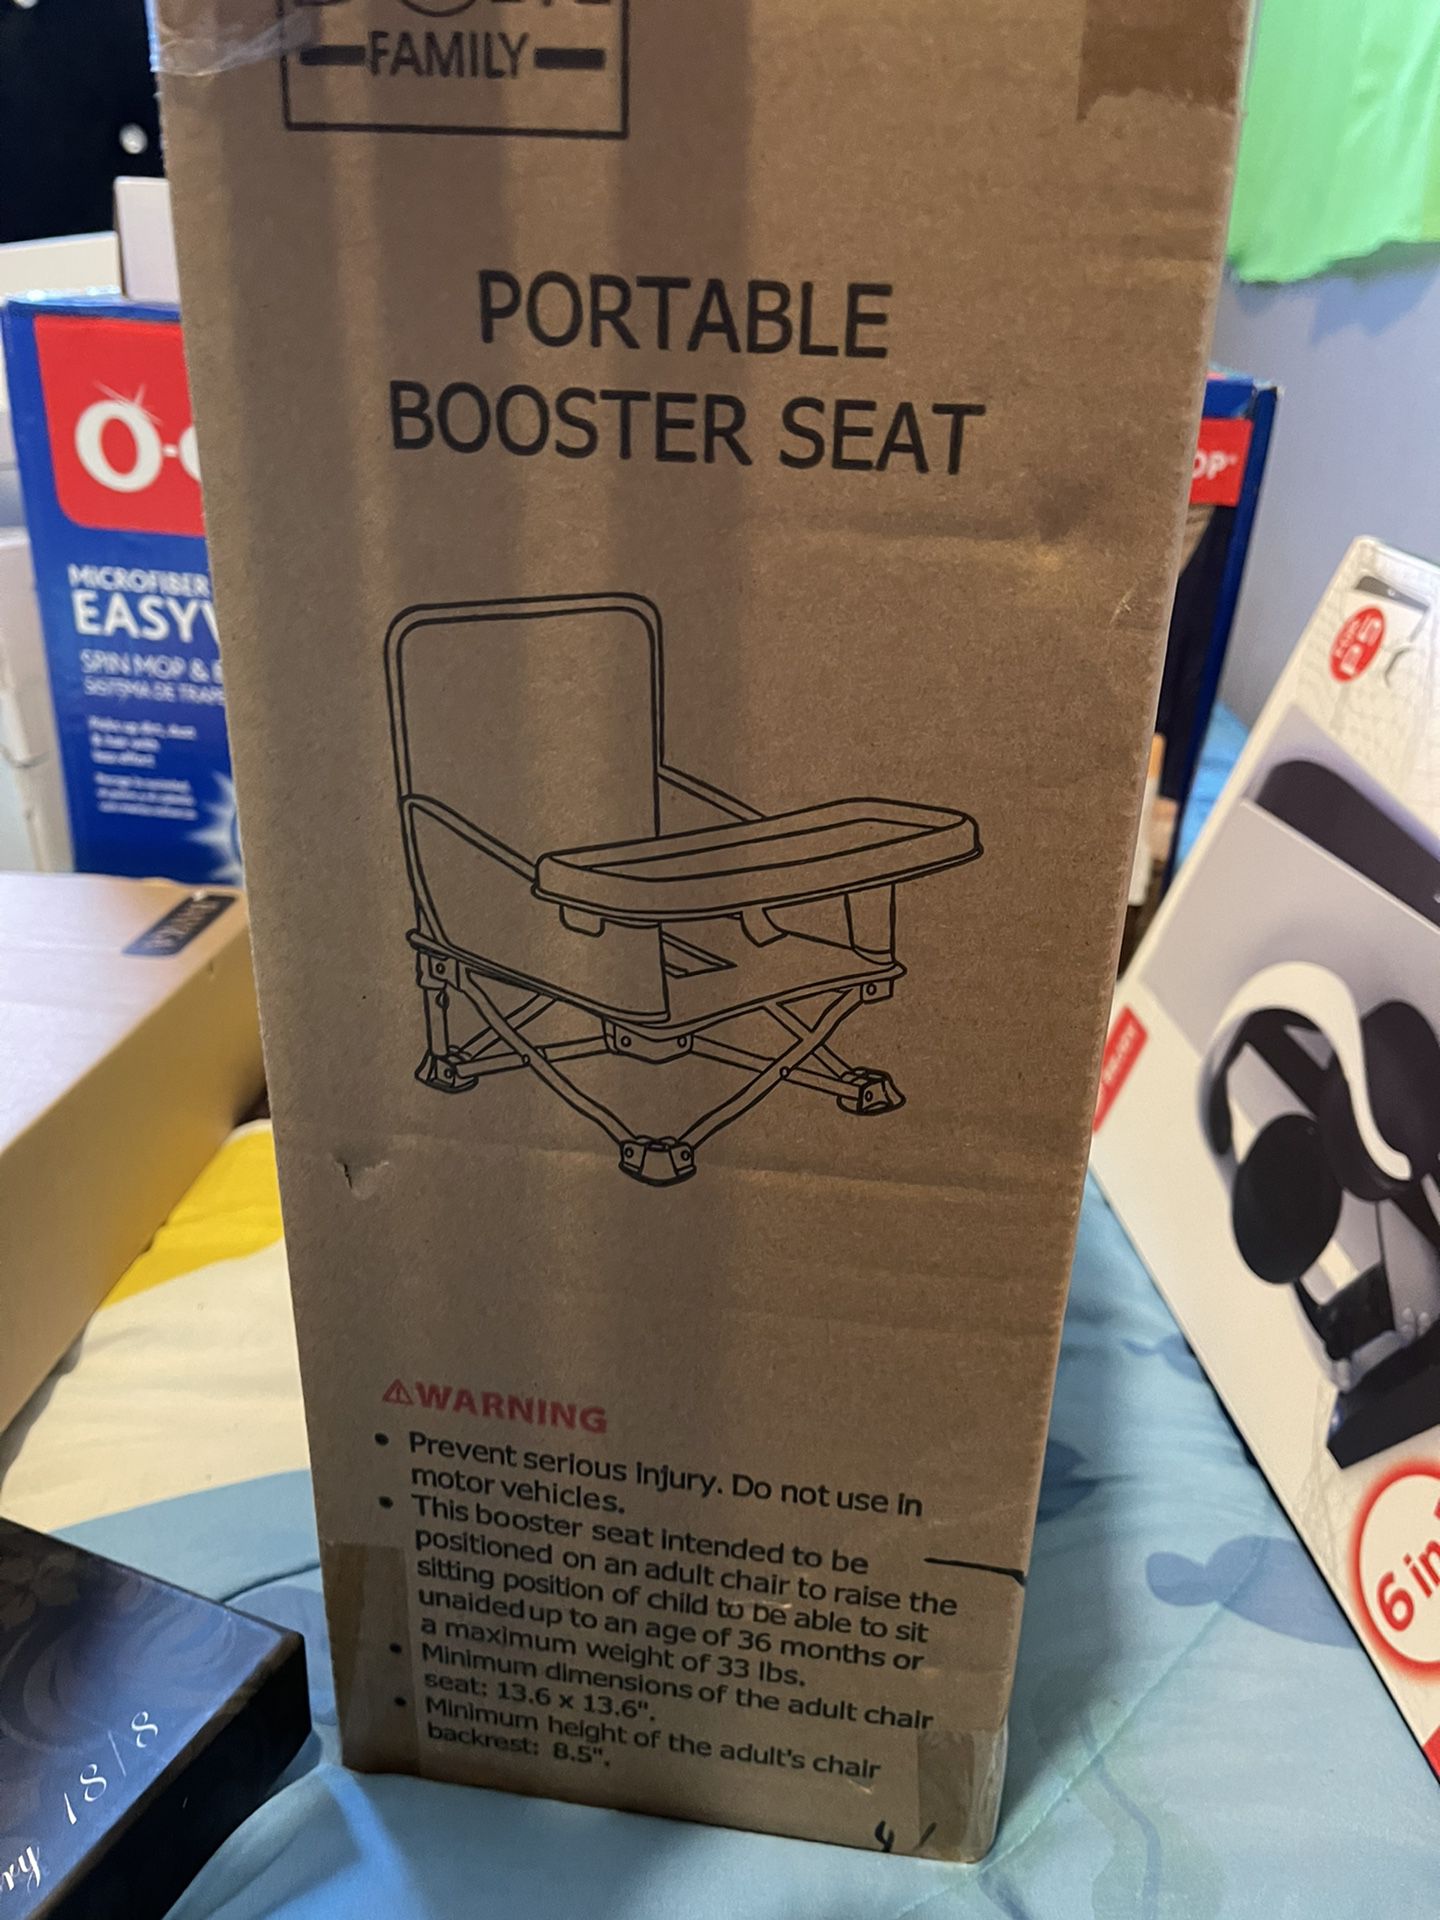  Portable Booster Seat For Kid Very Durable 